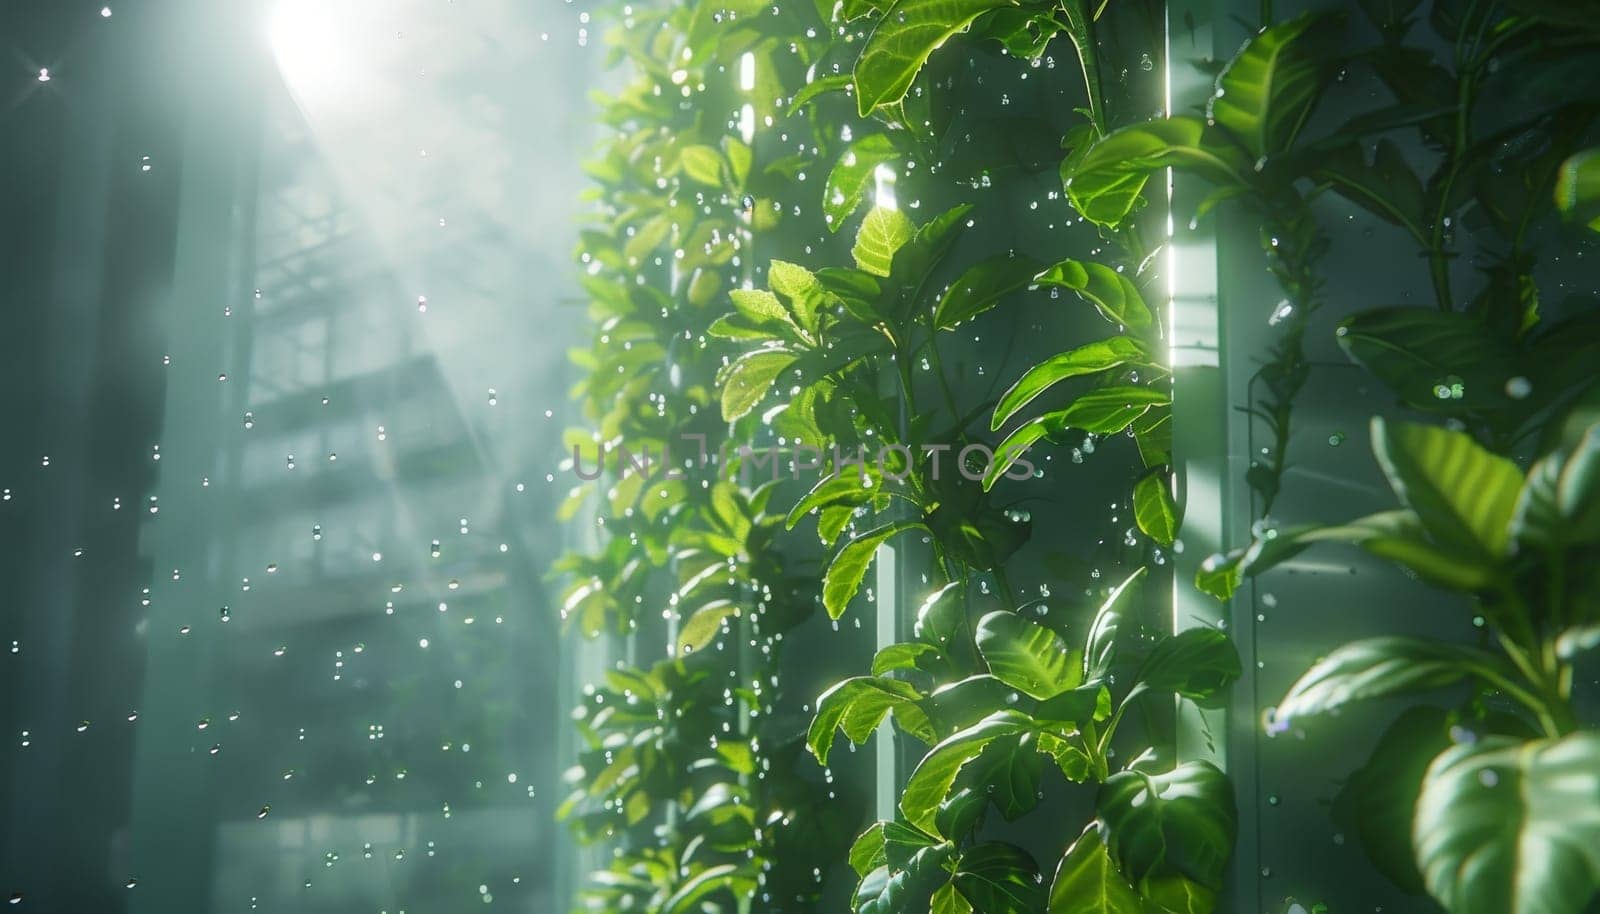 A lush green plant is growing in a greenhouse. The leaves are wet and shiny, and the sunlight is shining through the glass, creating a peaceful and serene atmosphere